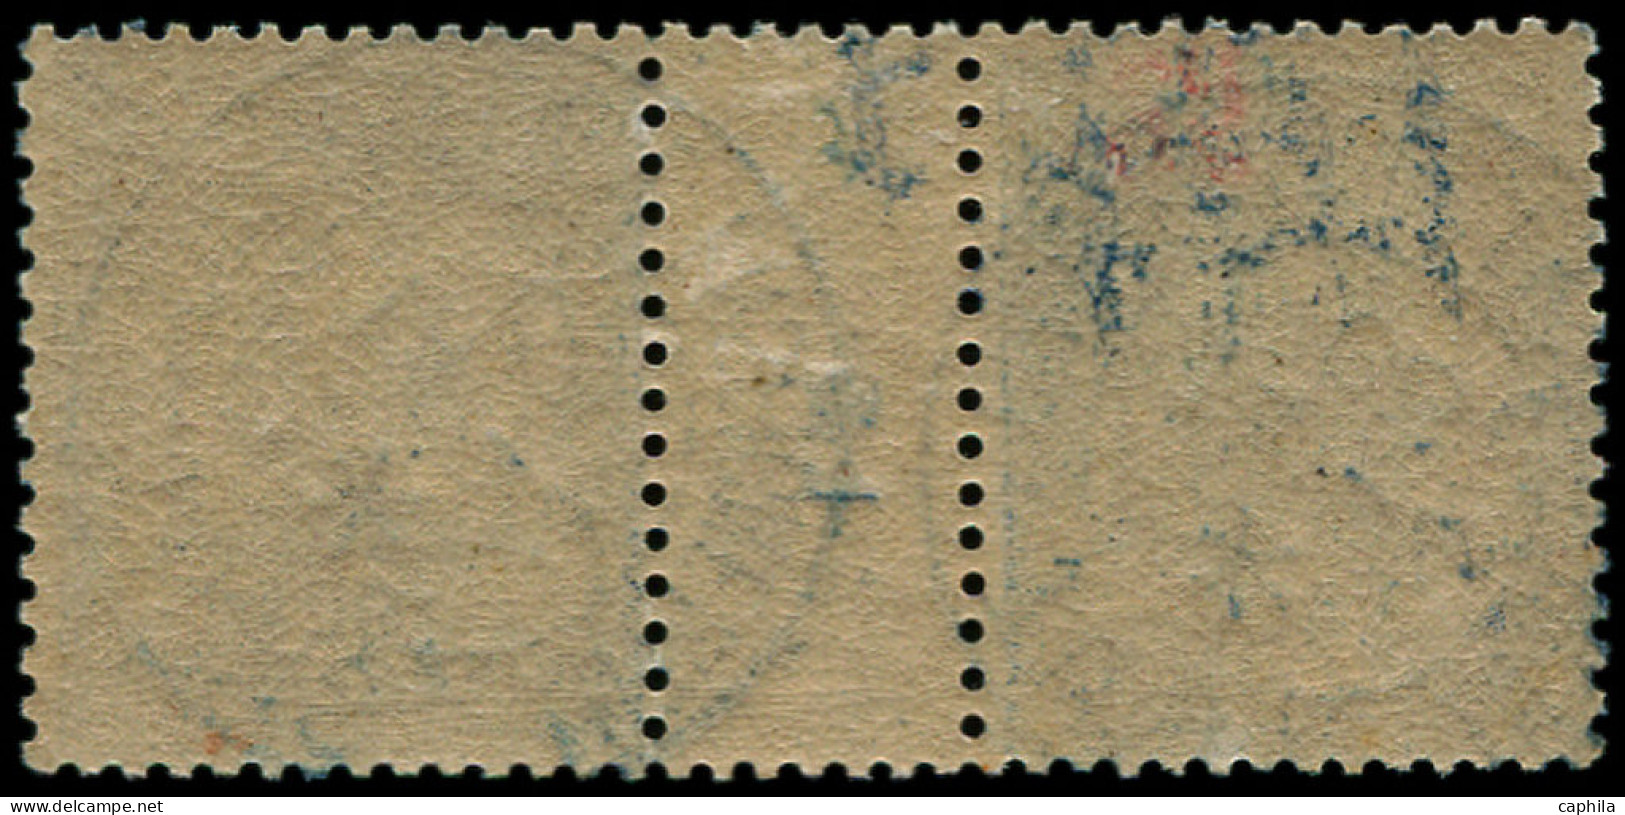 O TUNISIE - Poste - 25, Paire Millésime "2" Avec Gomme: 25c. Bleu - Used Stamps